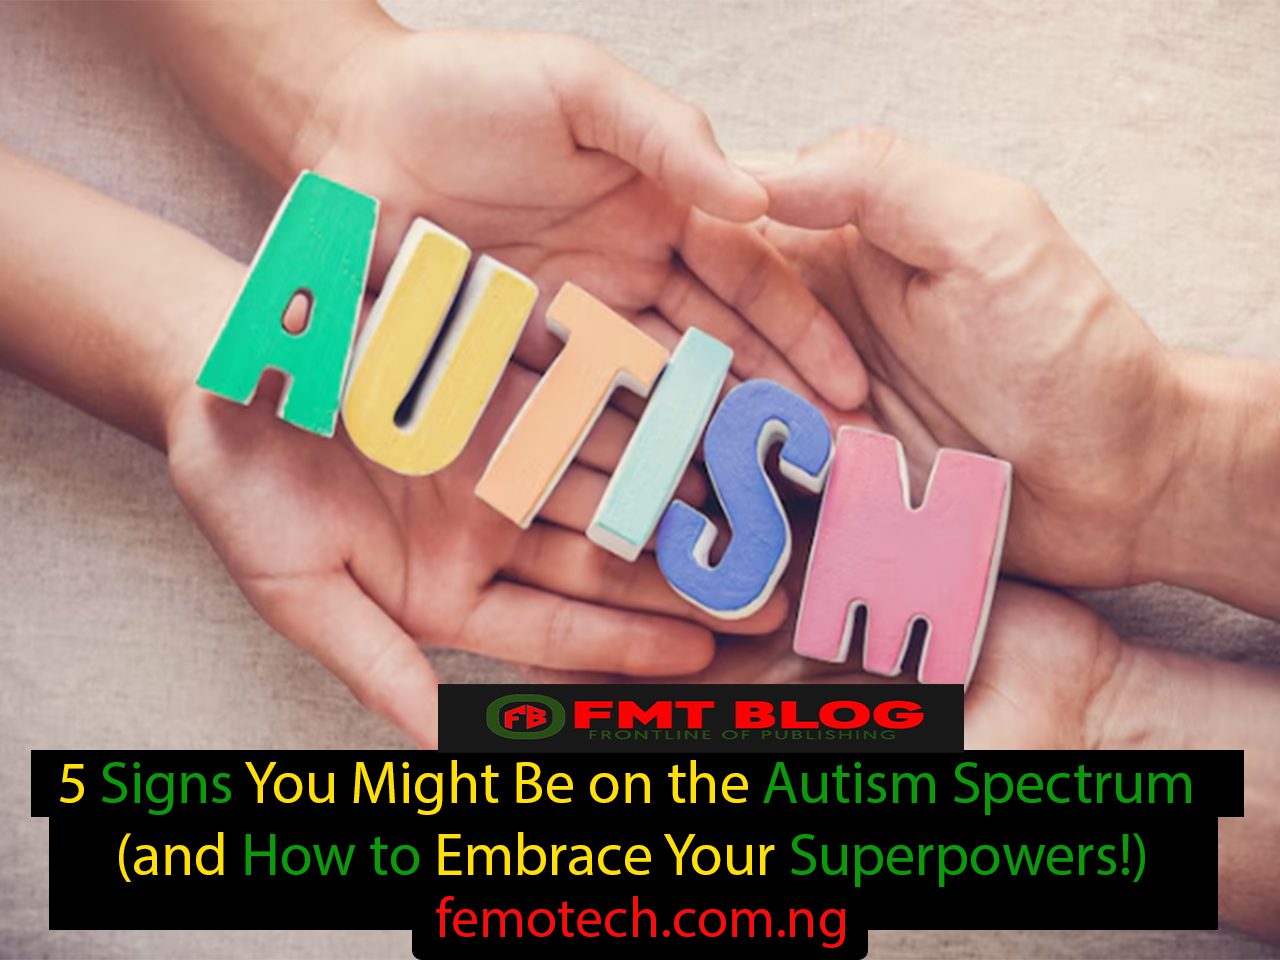 5 Signs You Might Be on the Autism Spectrum (and How to Embrace Your Superpowers!)